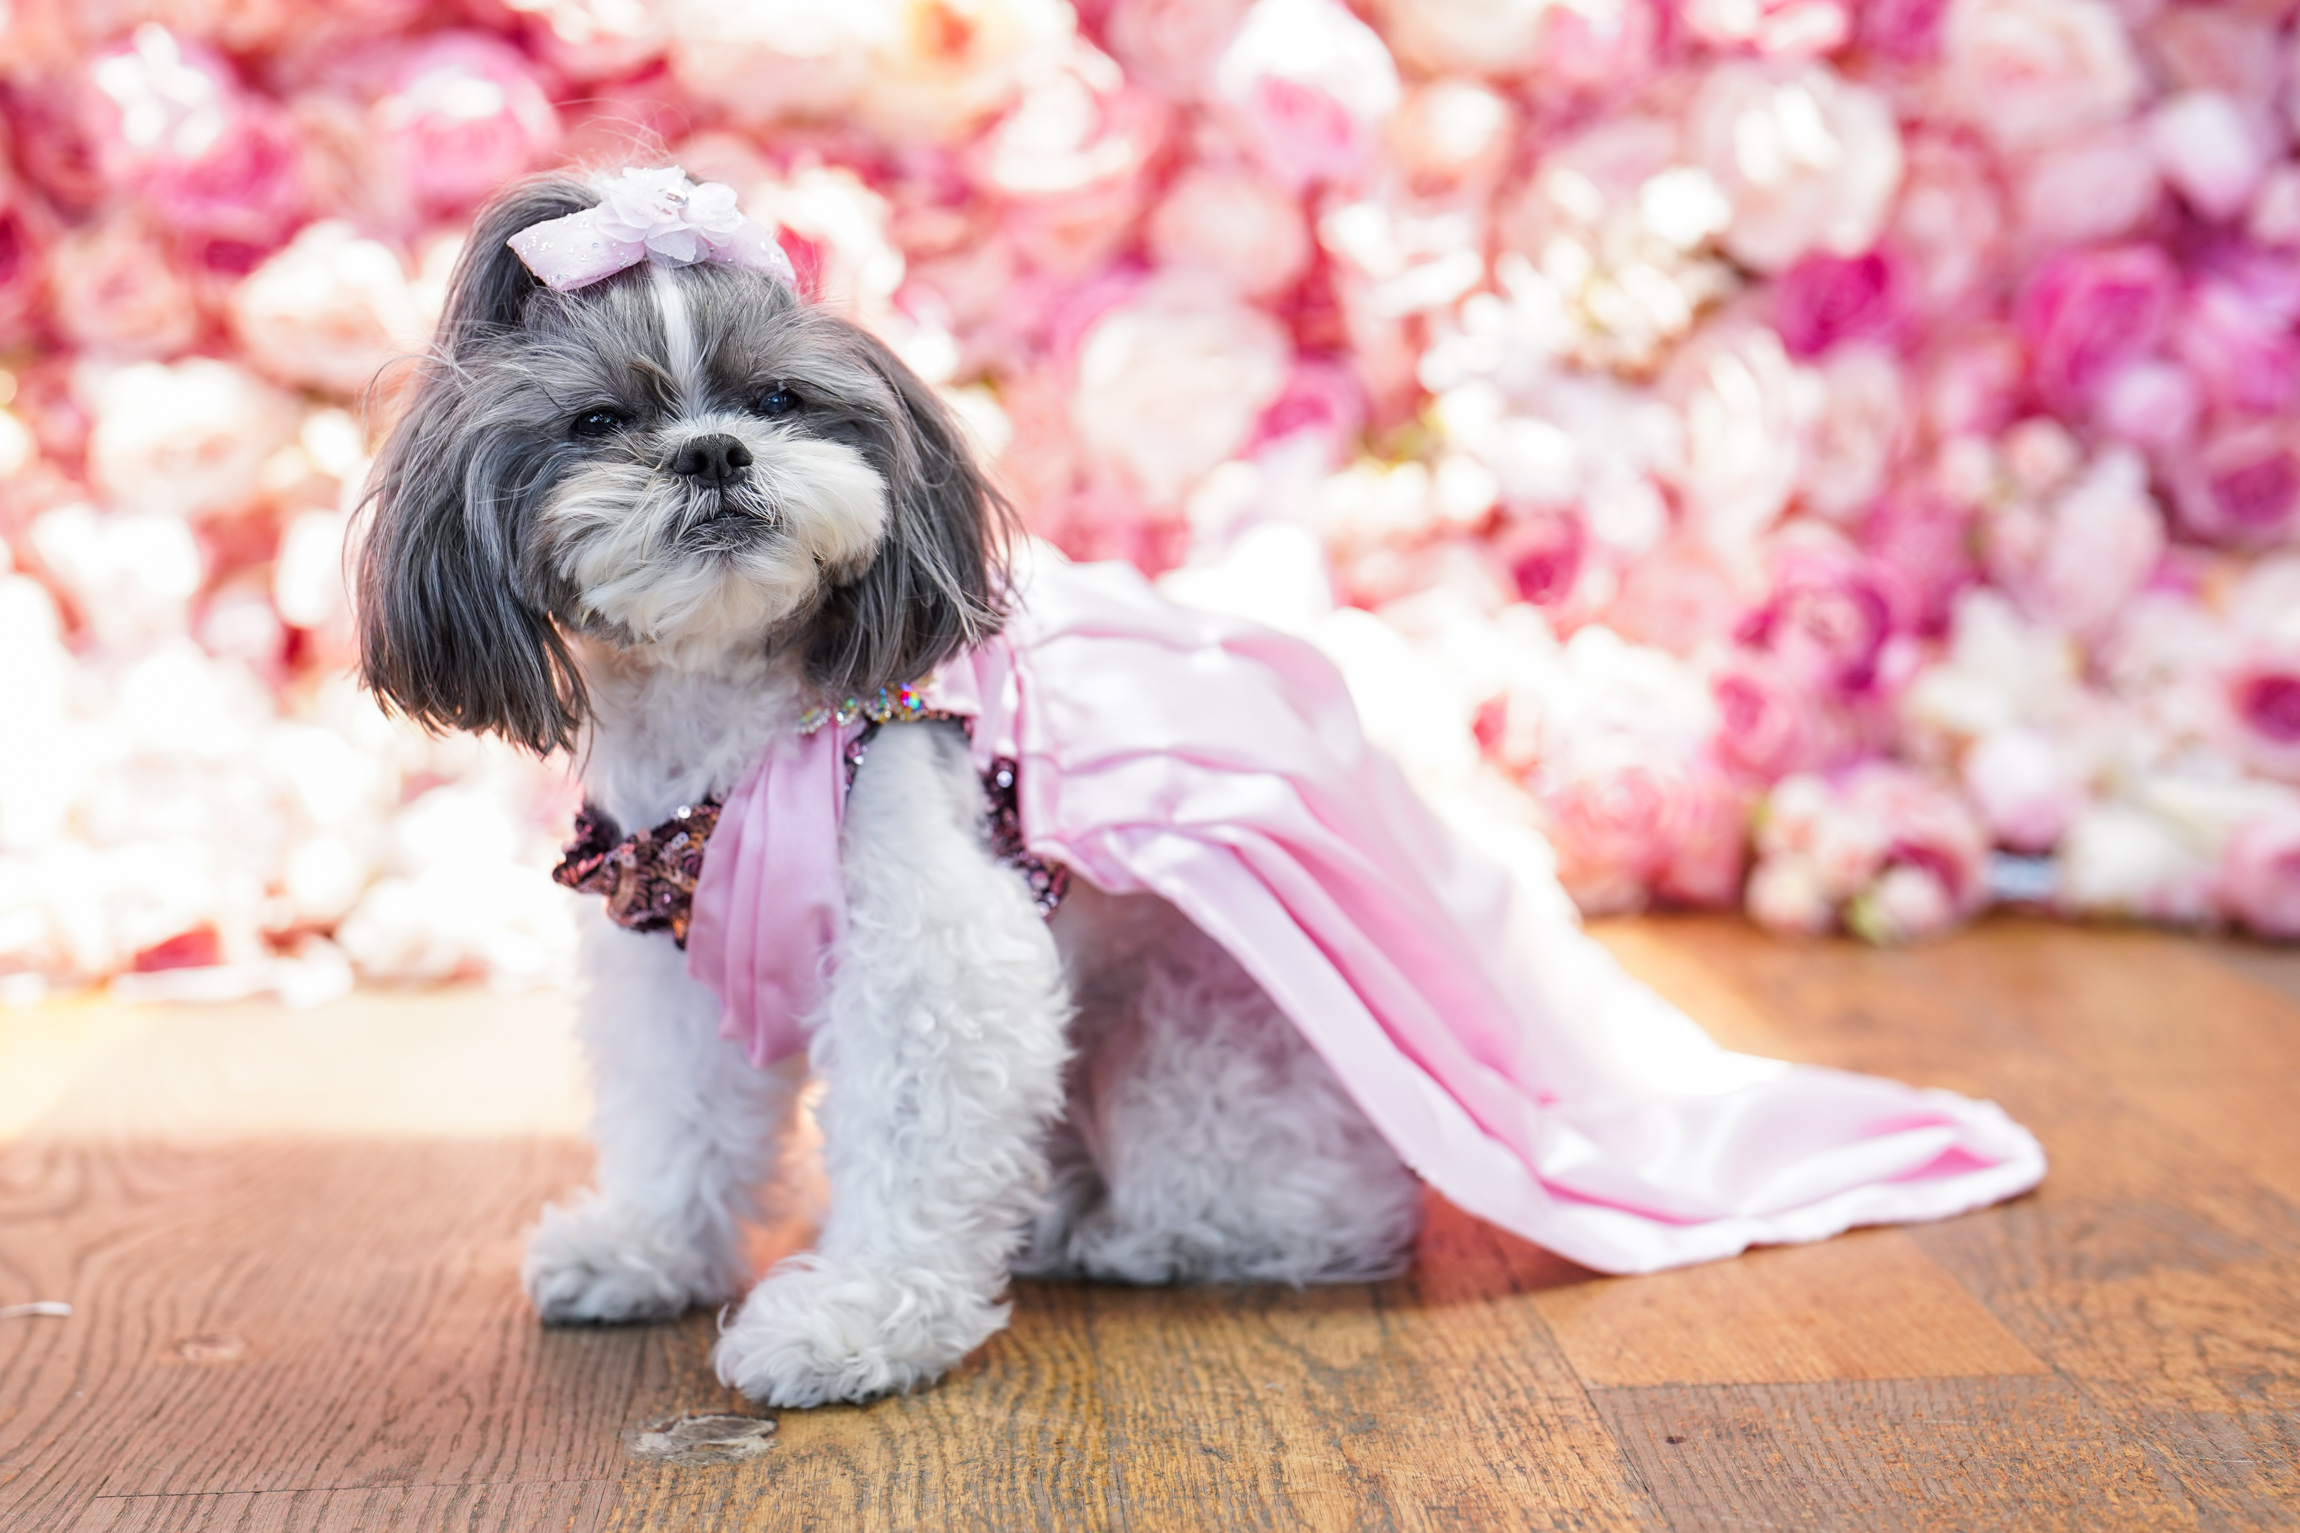 Forget the Met Gala. Have you seen the Pet Gala?